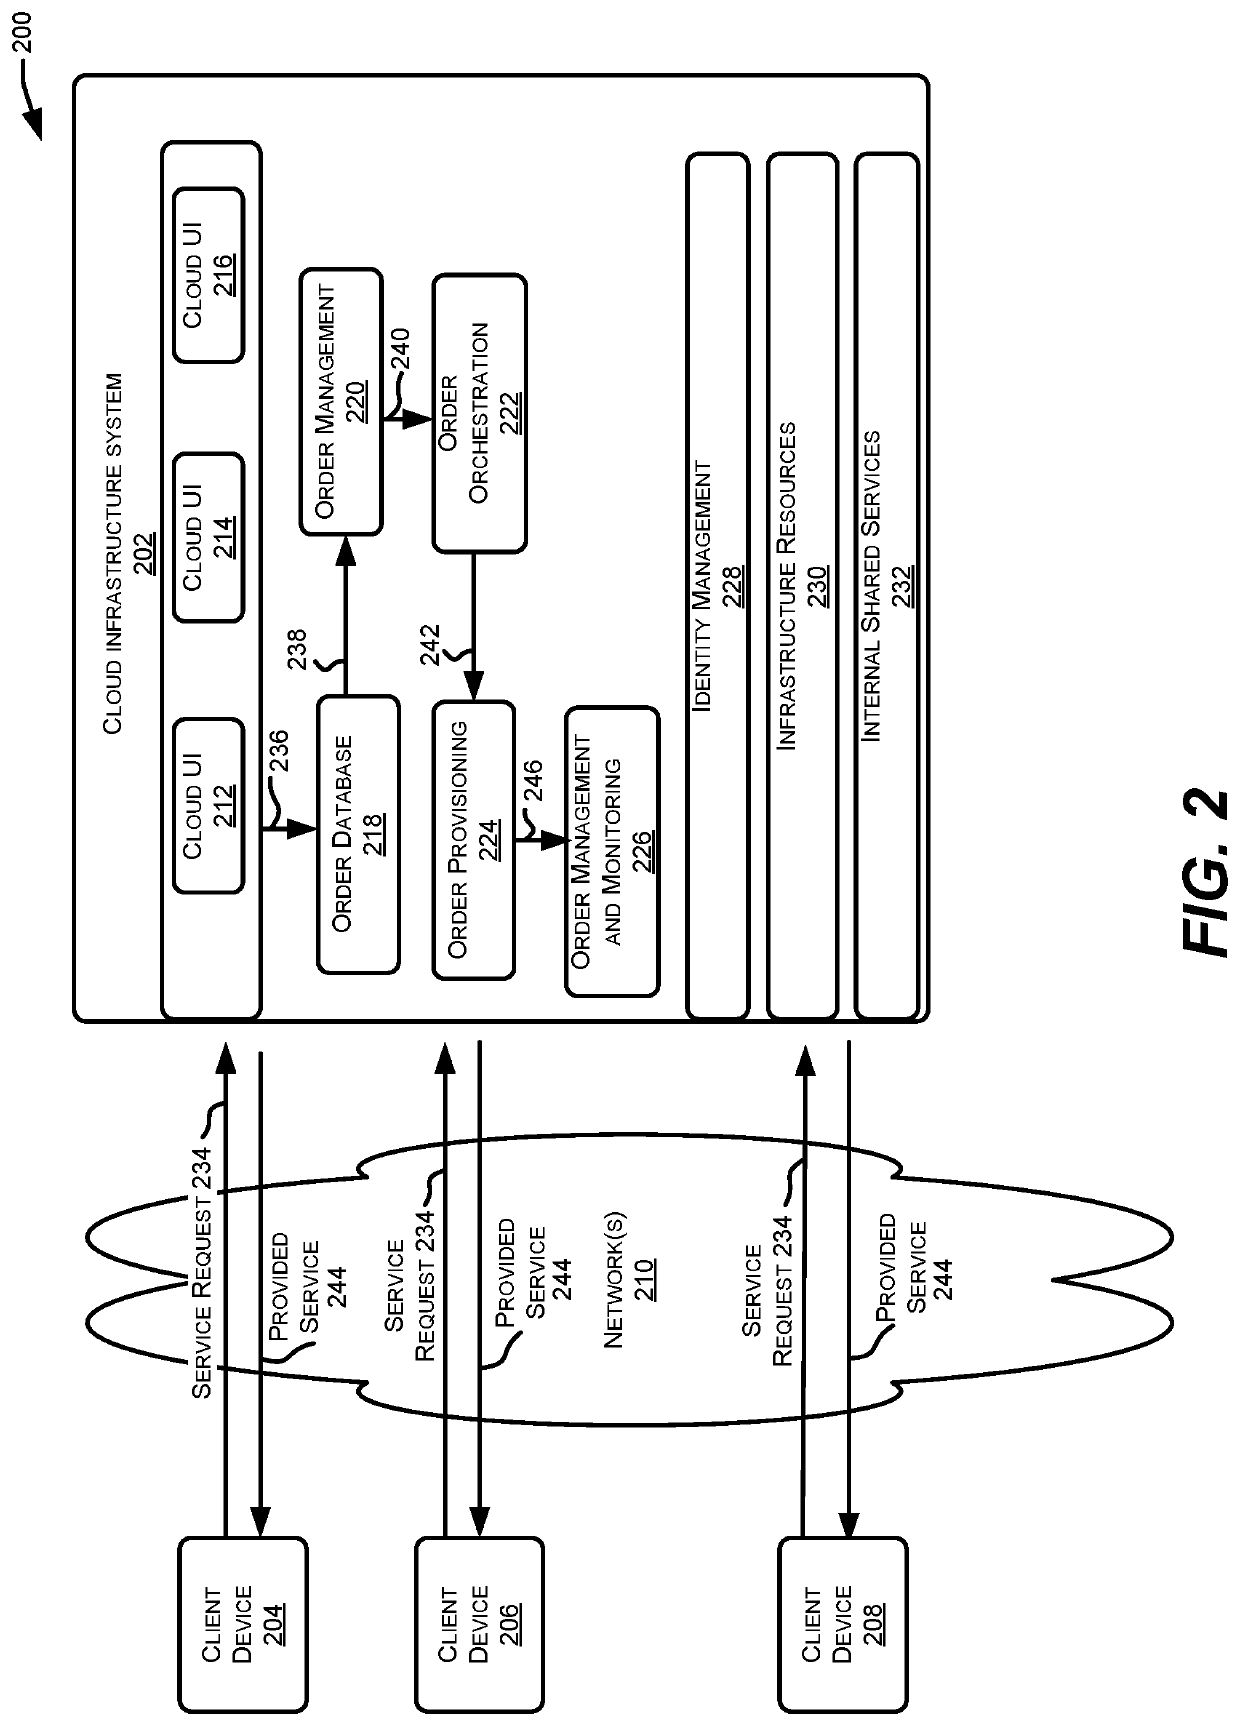 Instant notification of load balance and resource scheduling based on resource capacities and event recognition